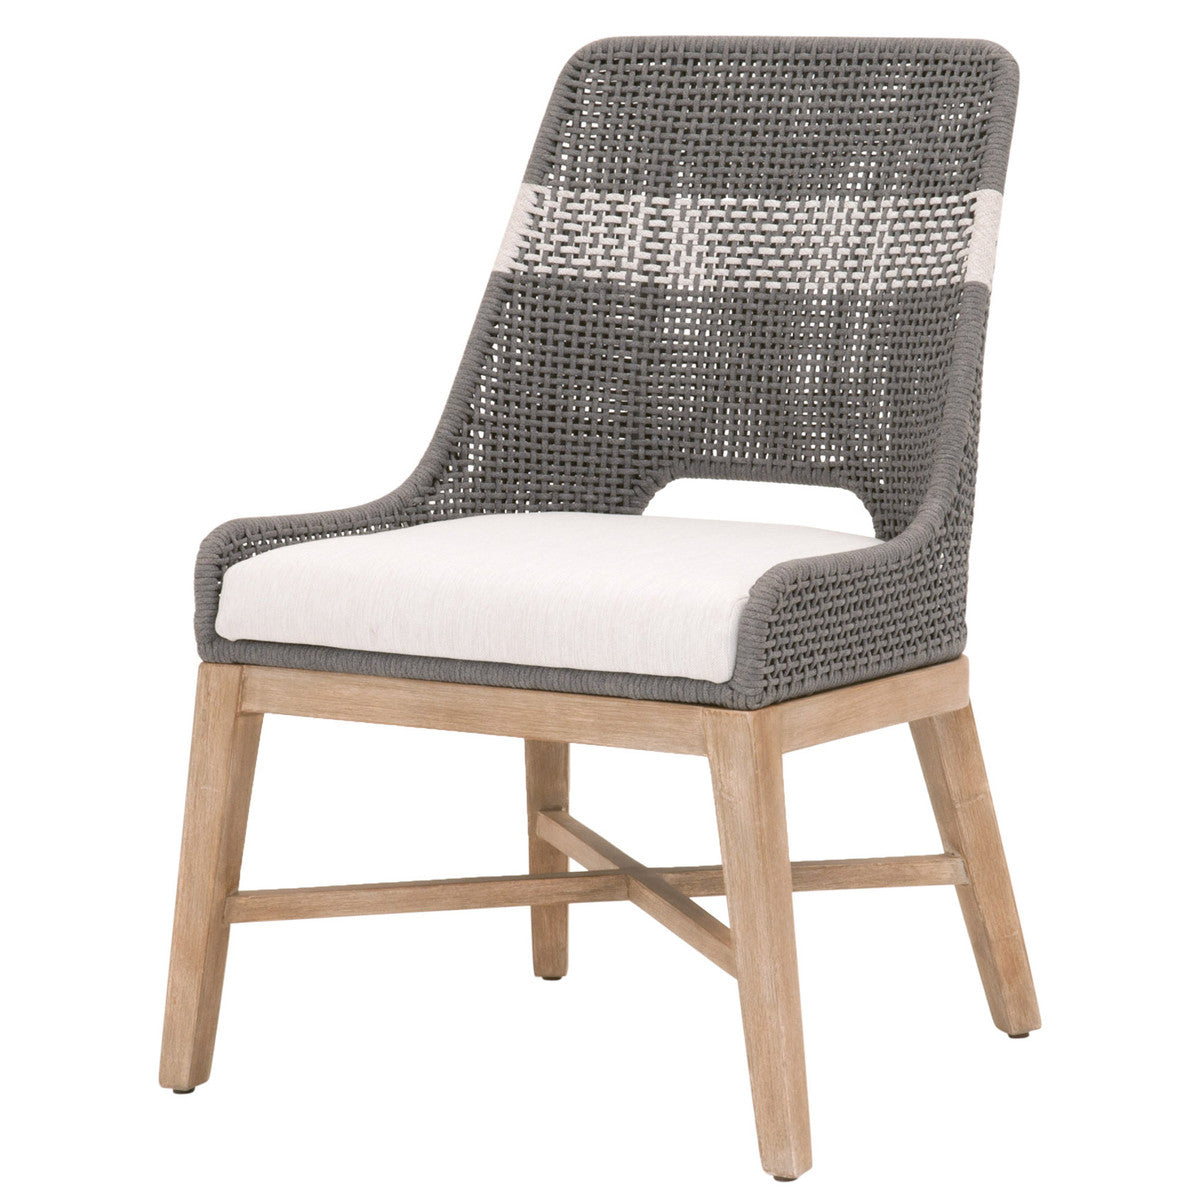 Tapestry Dining Chair in Dove Flat Rope, White Speckle Stripe, Performance White Speckle, Natural Gray Mahogany, Set of 2 - 6850.DOV/WHT/NG